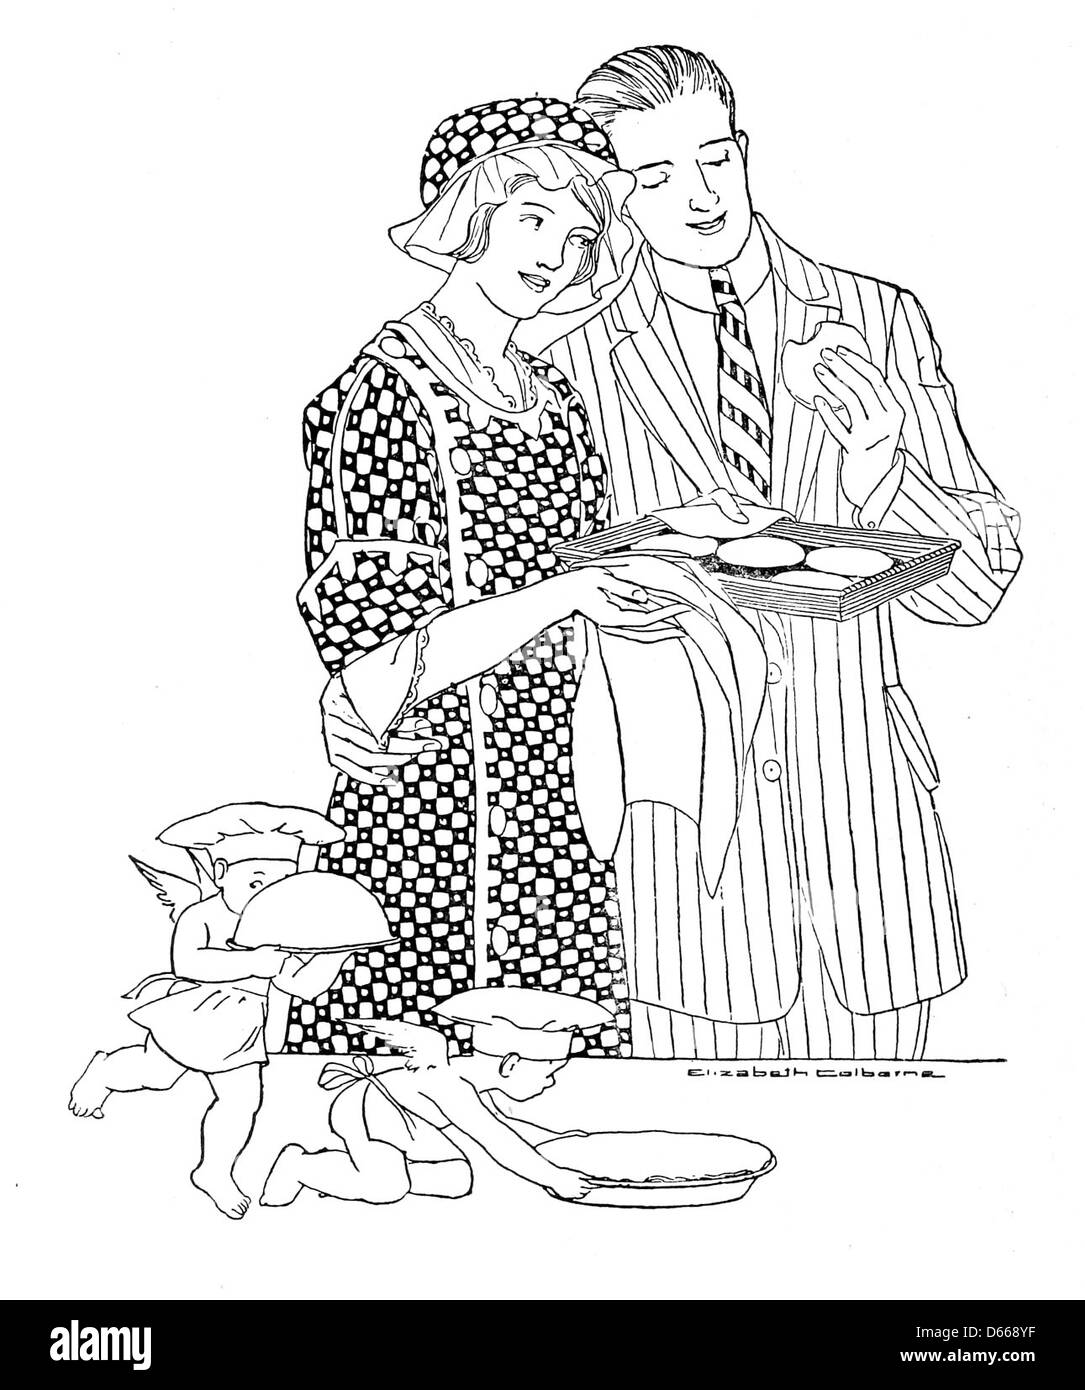 A thousand ways to please a husband with Bettina's best recipes (1917) Stock Photo